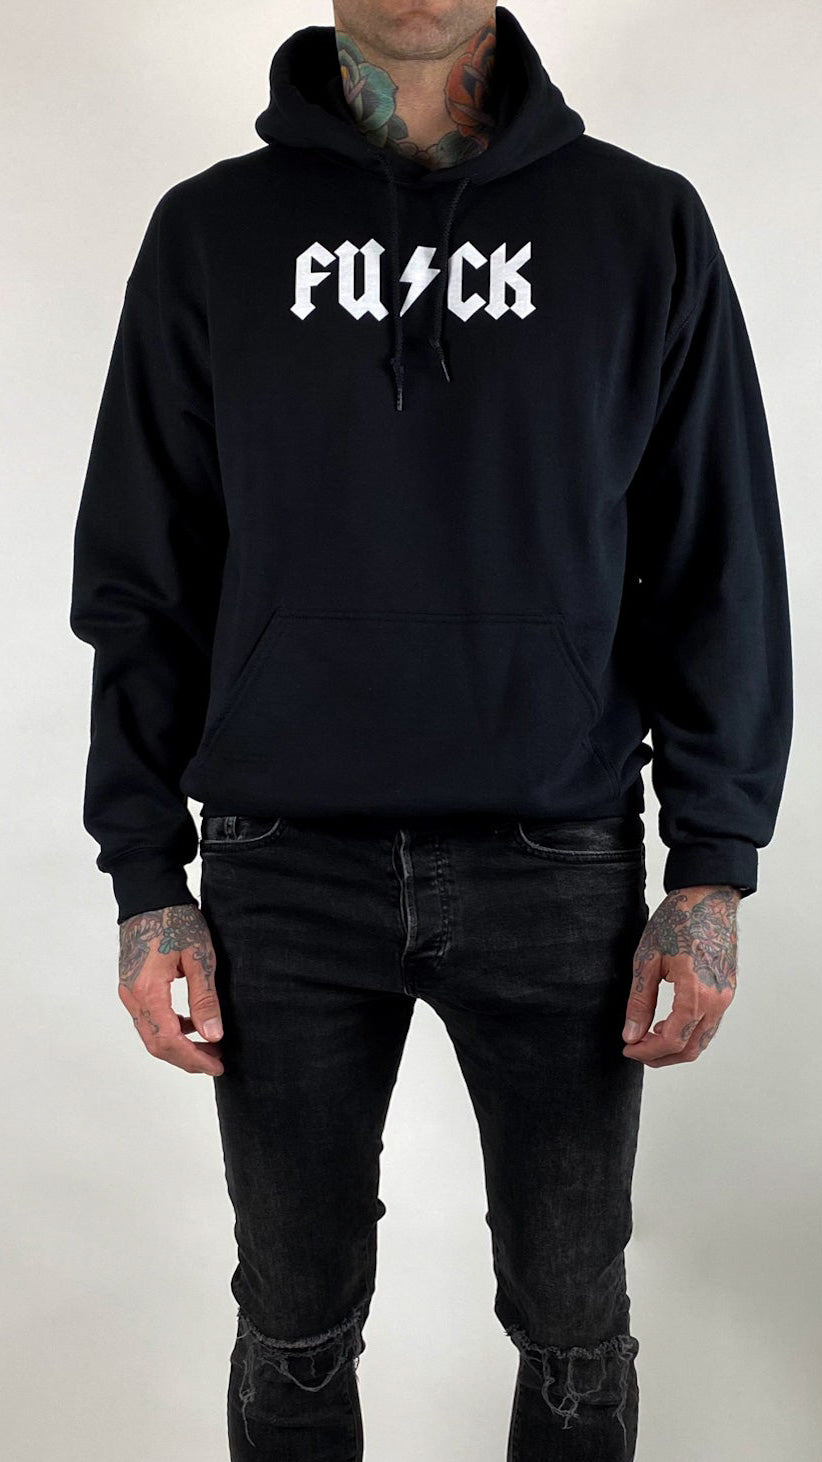 THE BAND UNISEX HOODIE